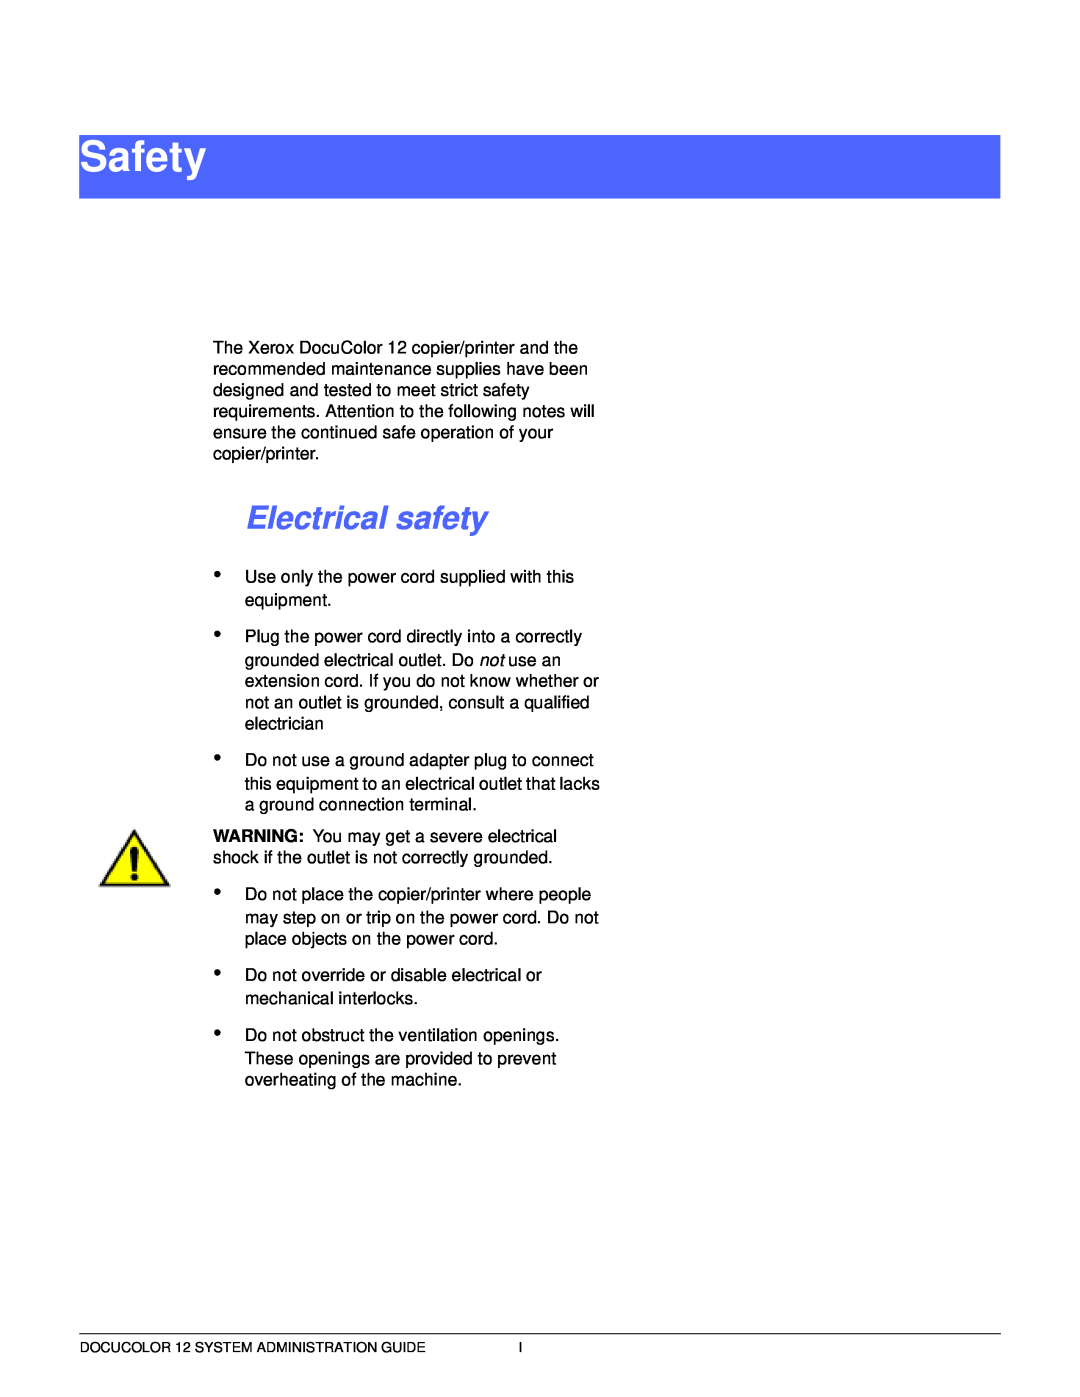 Xerox a2 manual Safety, Electrical safety, 1 2 3 4 5 6 7 